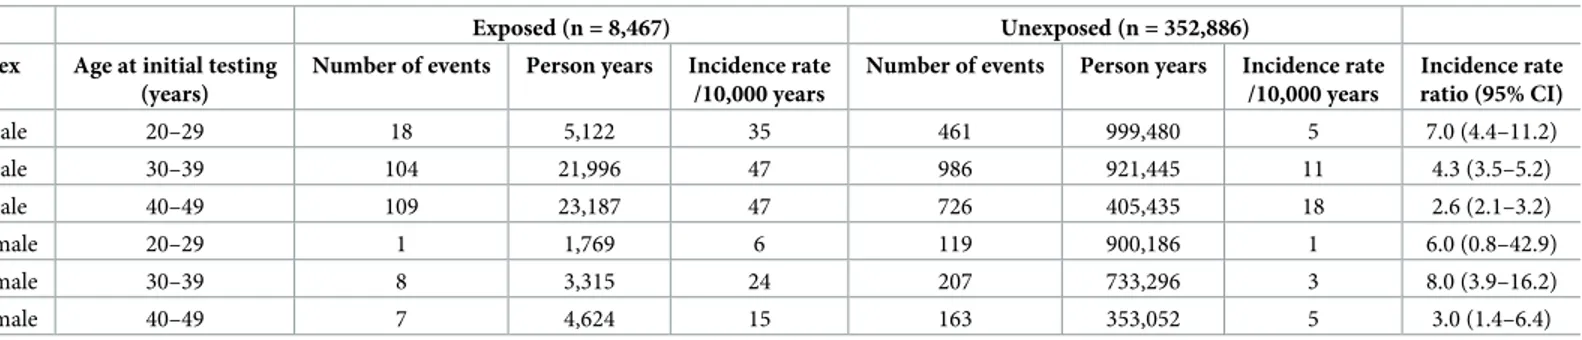 Table 1. Incidence rate and incidence rate ratio with 95% confidence interval for an adverse cardiac event before age 50 among 361,353 men and women stratified to three age groups with total cholesterol 6.0 mmol/L, triglycerides 1.40 mmol/L, and glucose 